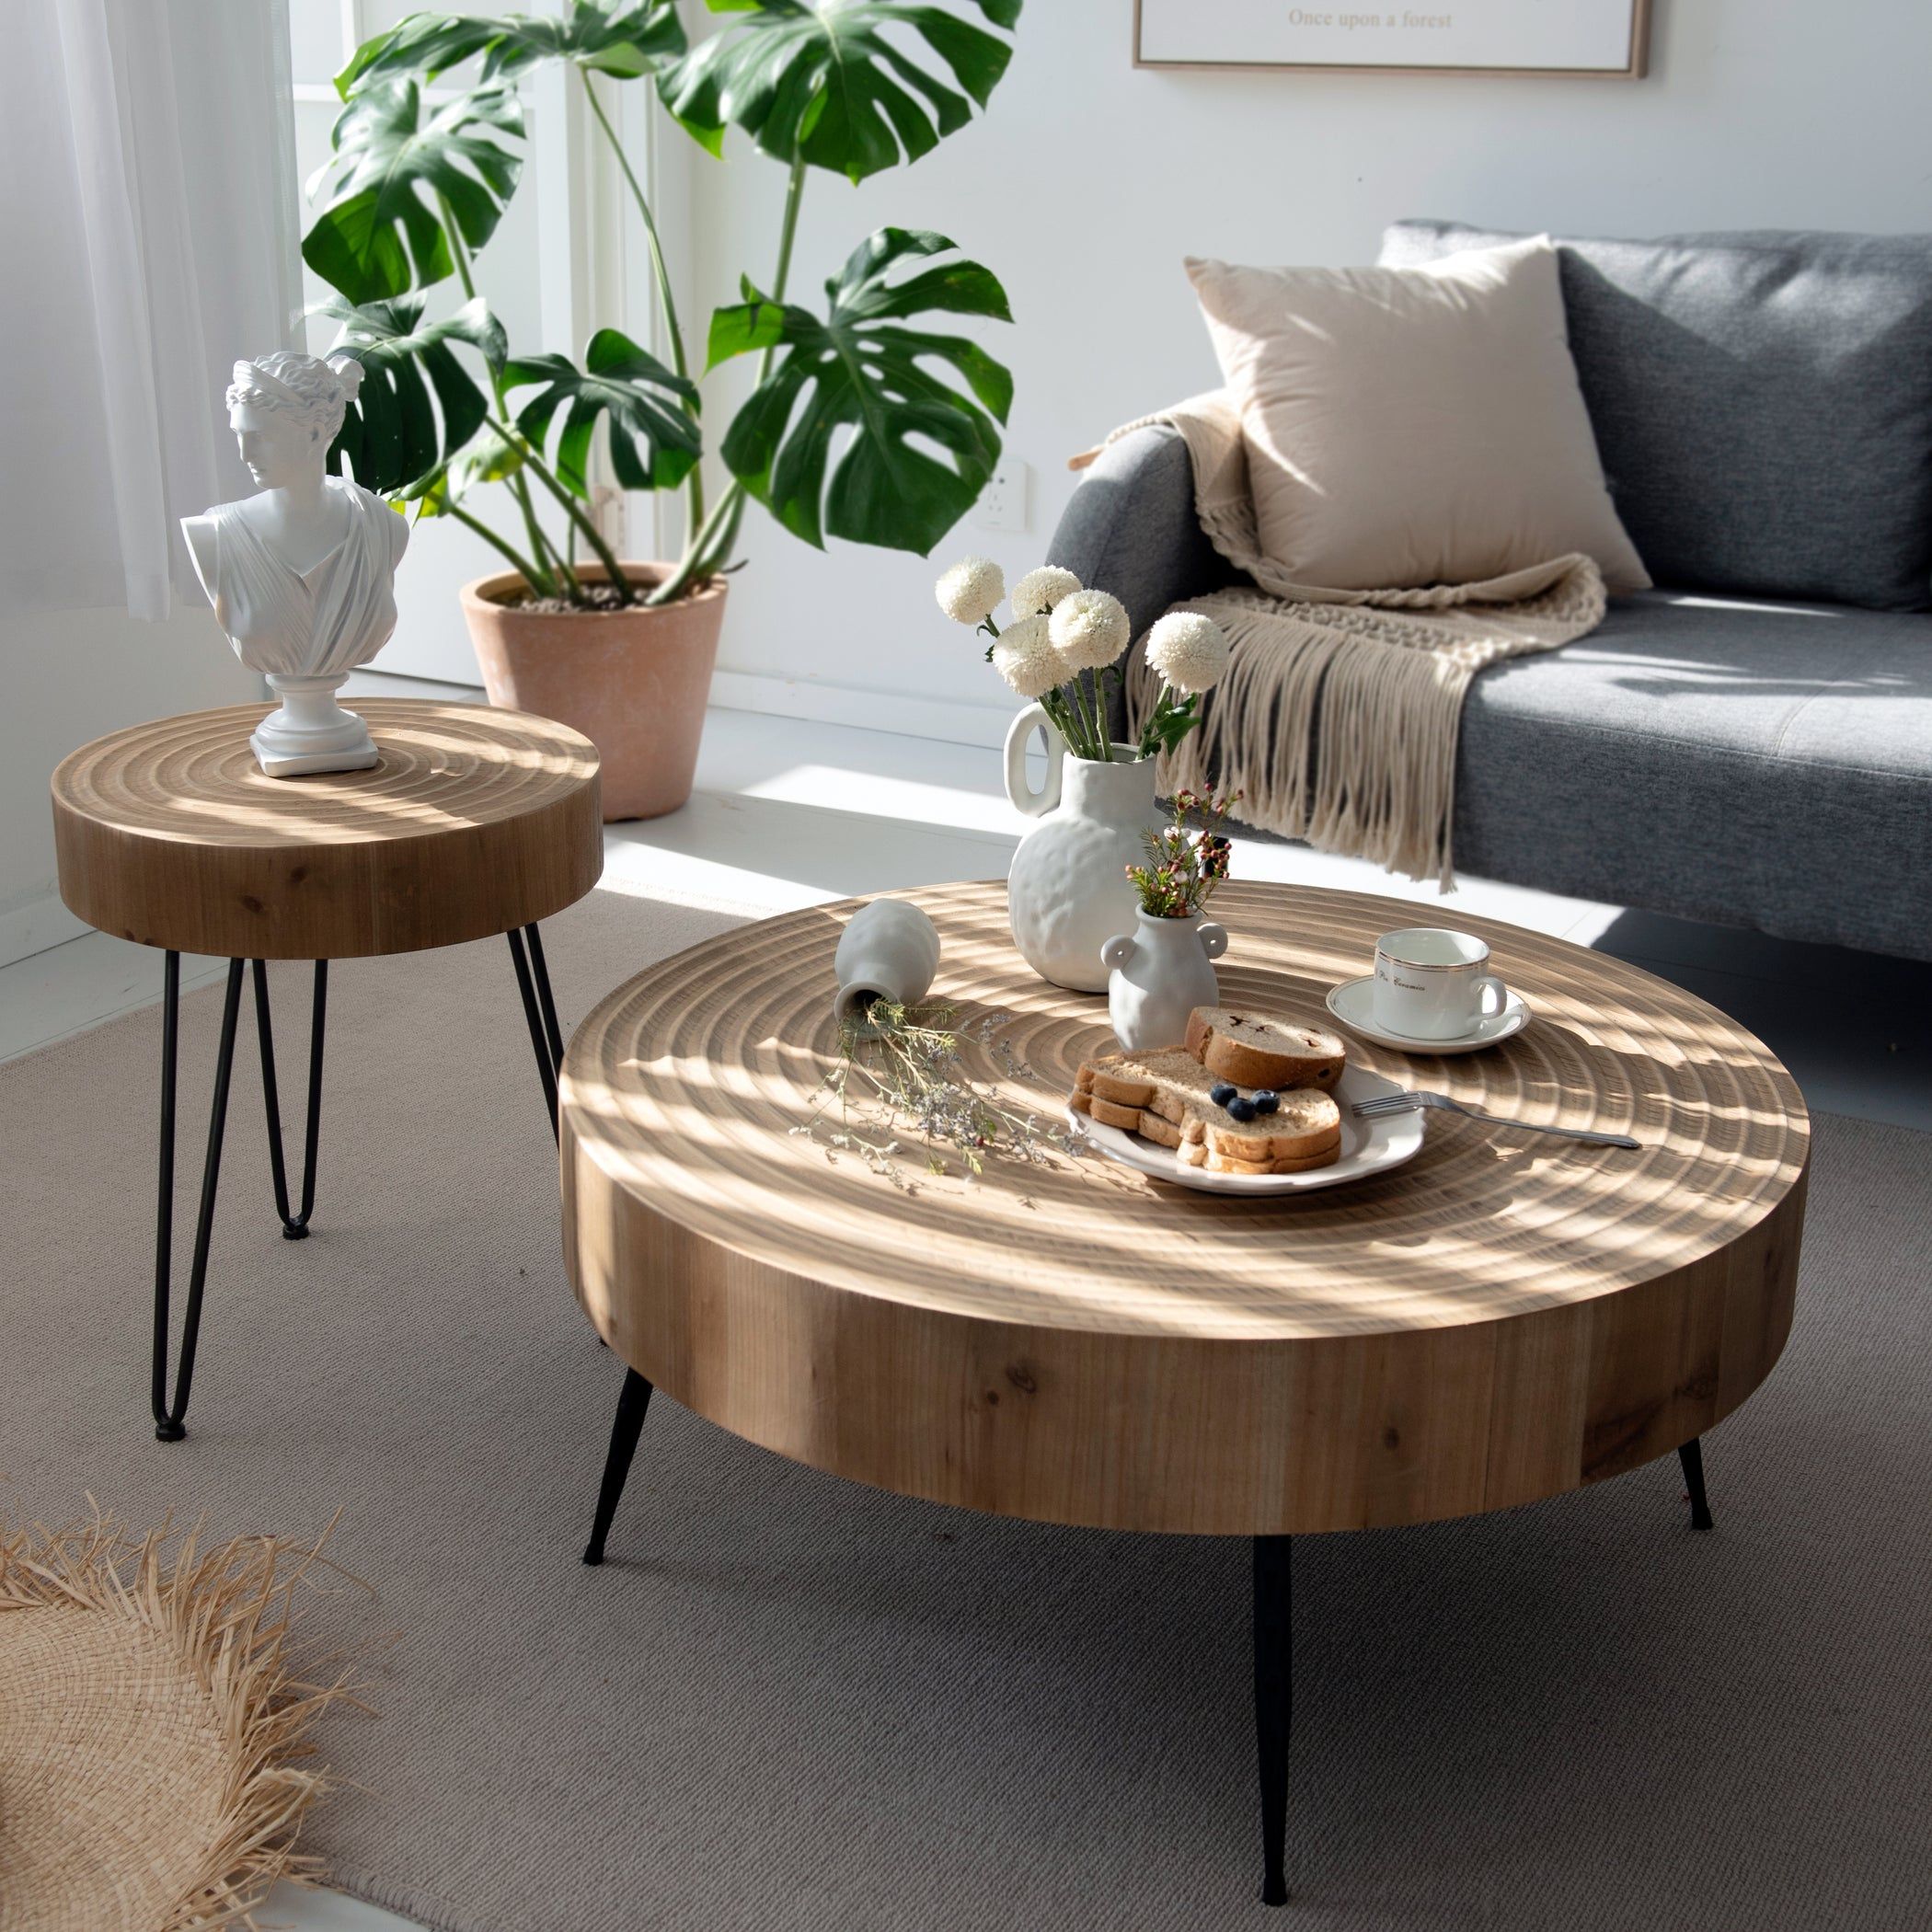 Cozayh 2 Piece Modern Farmhouse Living Room Coffee Table Set, Round With Living Room Farmhouse Coffee Tables (View 10 of 15)